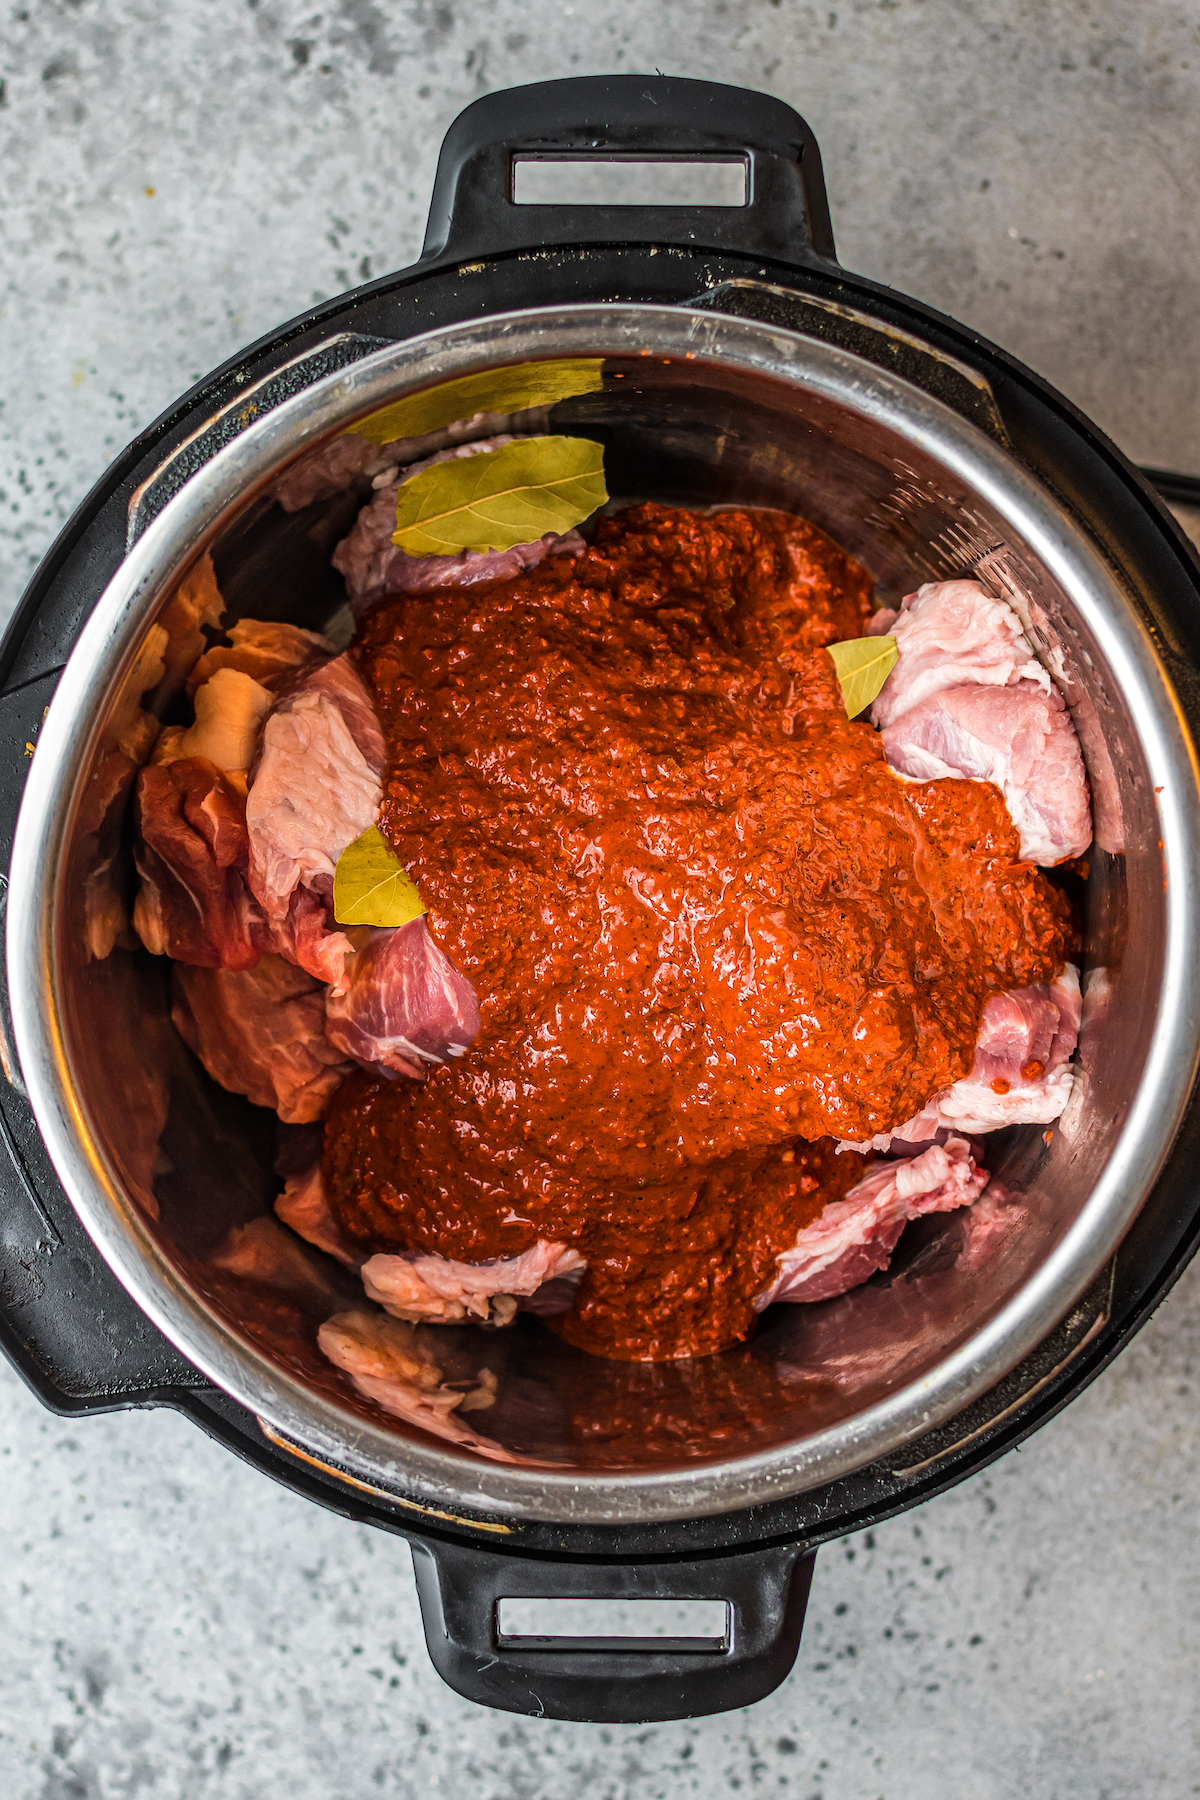 Pork and red pepper sauce about to be cooked in an Instant Pot